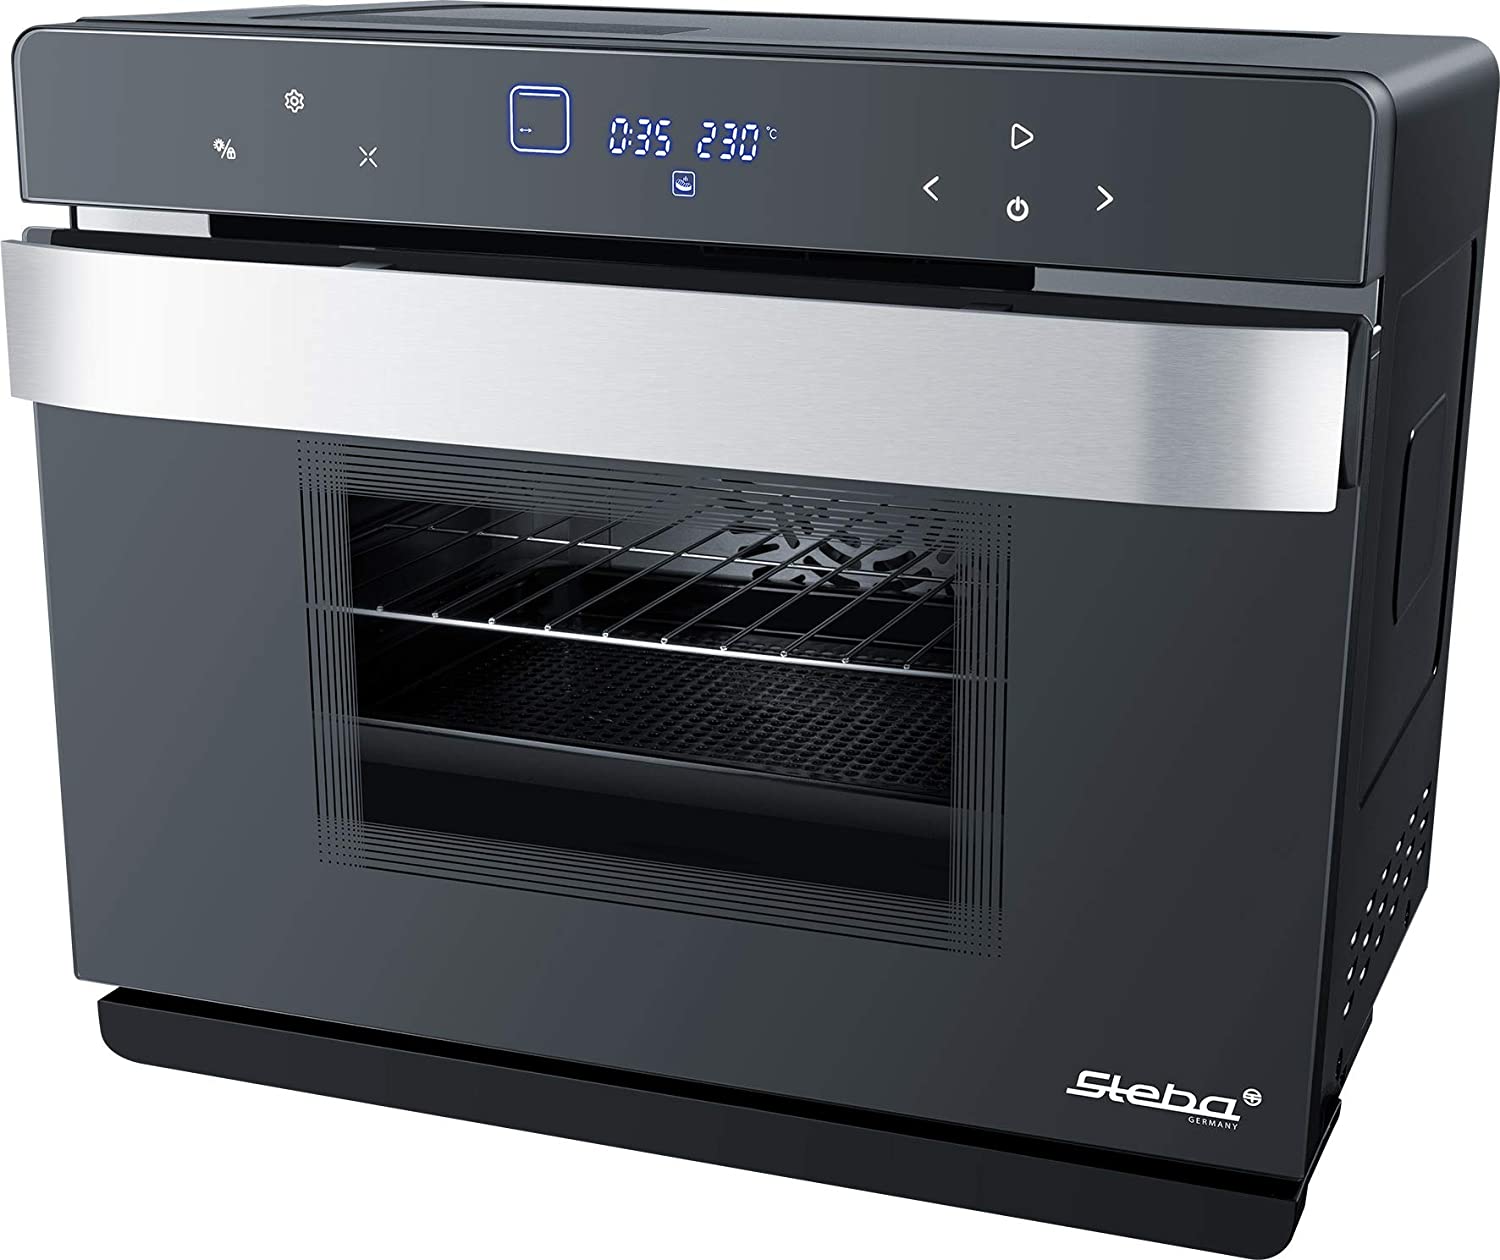 Steba Multifunctional steam oven DG 30, oven with hot steam for gentle quick cooking, effective housing insulation for low energy consumption, 47 automatic programs, DIY programs, 27 litres